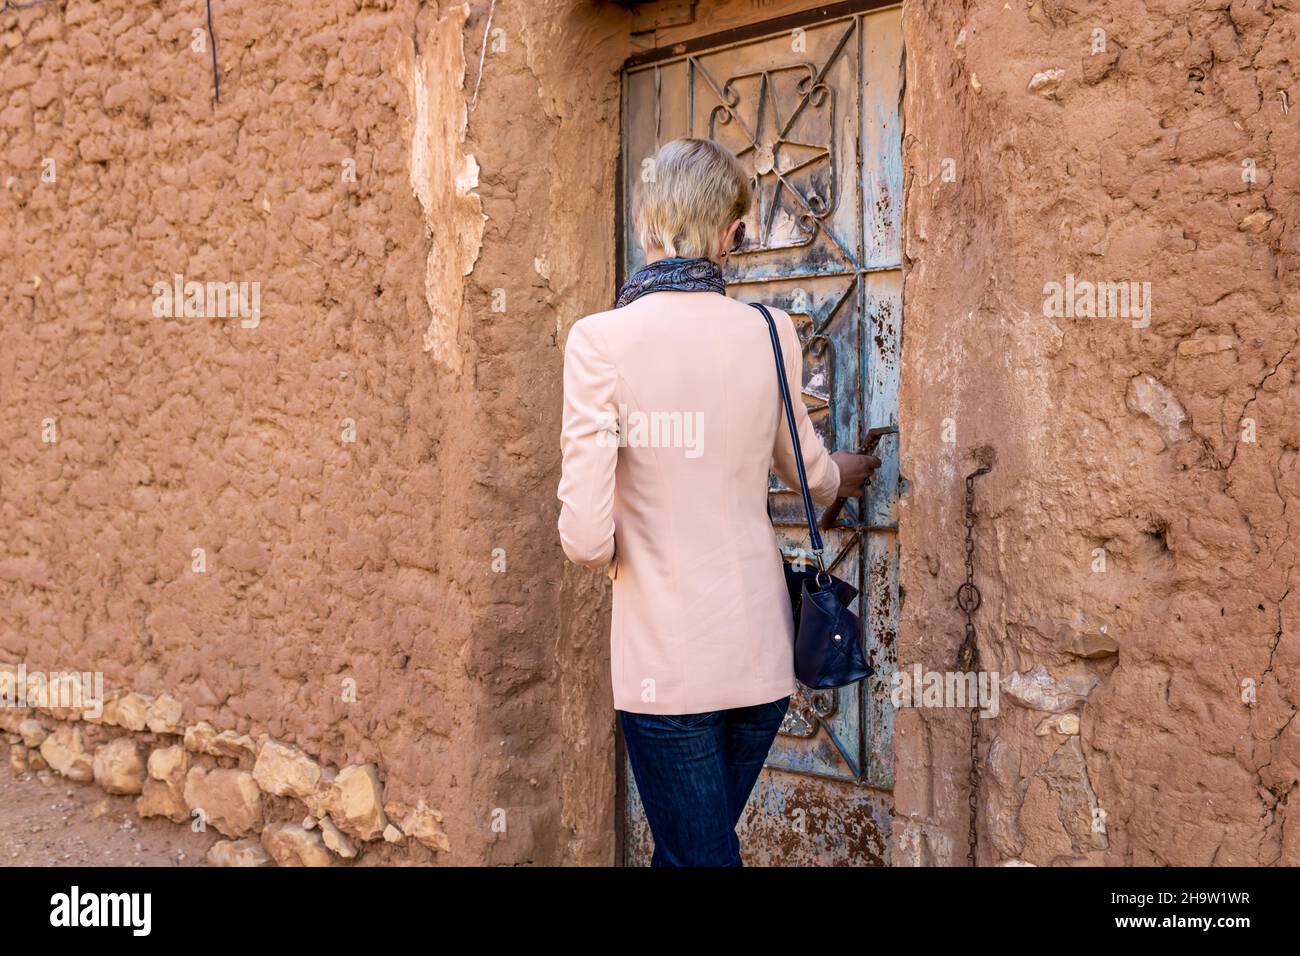 A Western female tourist standing at the old metal door in Ushaiqer Heritage Village, Saudi Arabia. Back view. Stock Photo